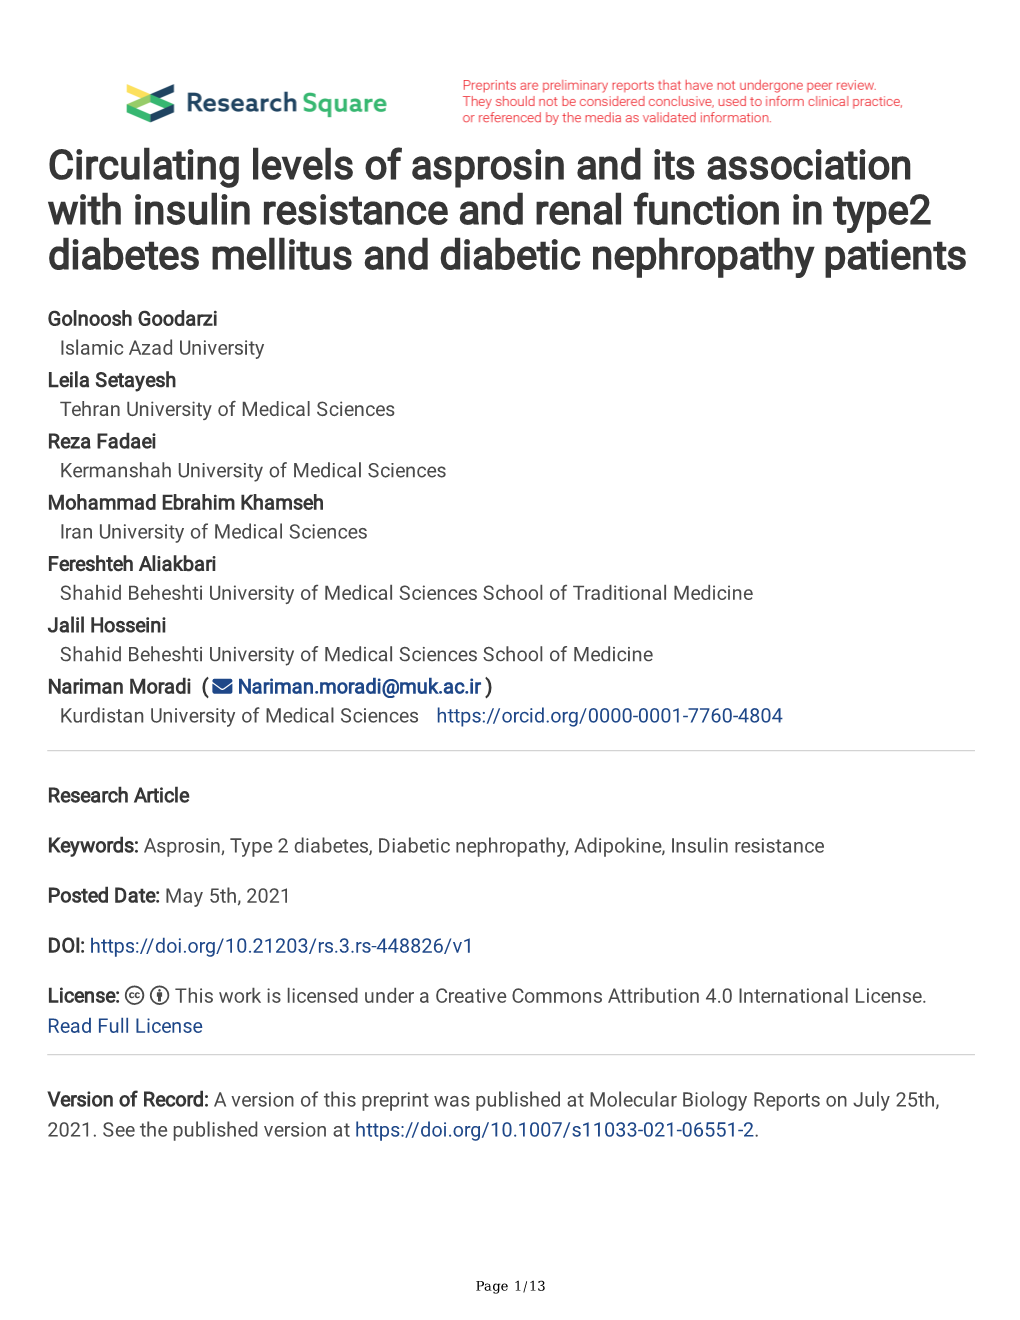 Circulating Levels of Asprosin and Its Association with Insulin Resistance and Renal Function in Type2 Diabetes Mellitus and Diabetic Nephropathy Patients